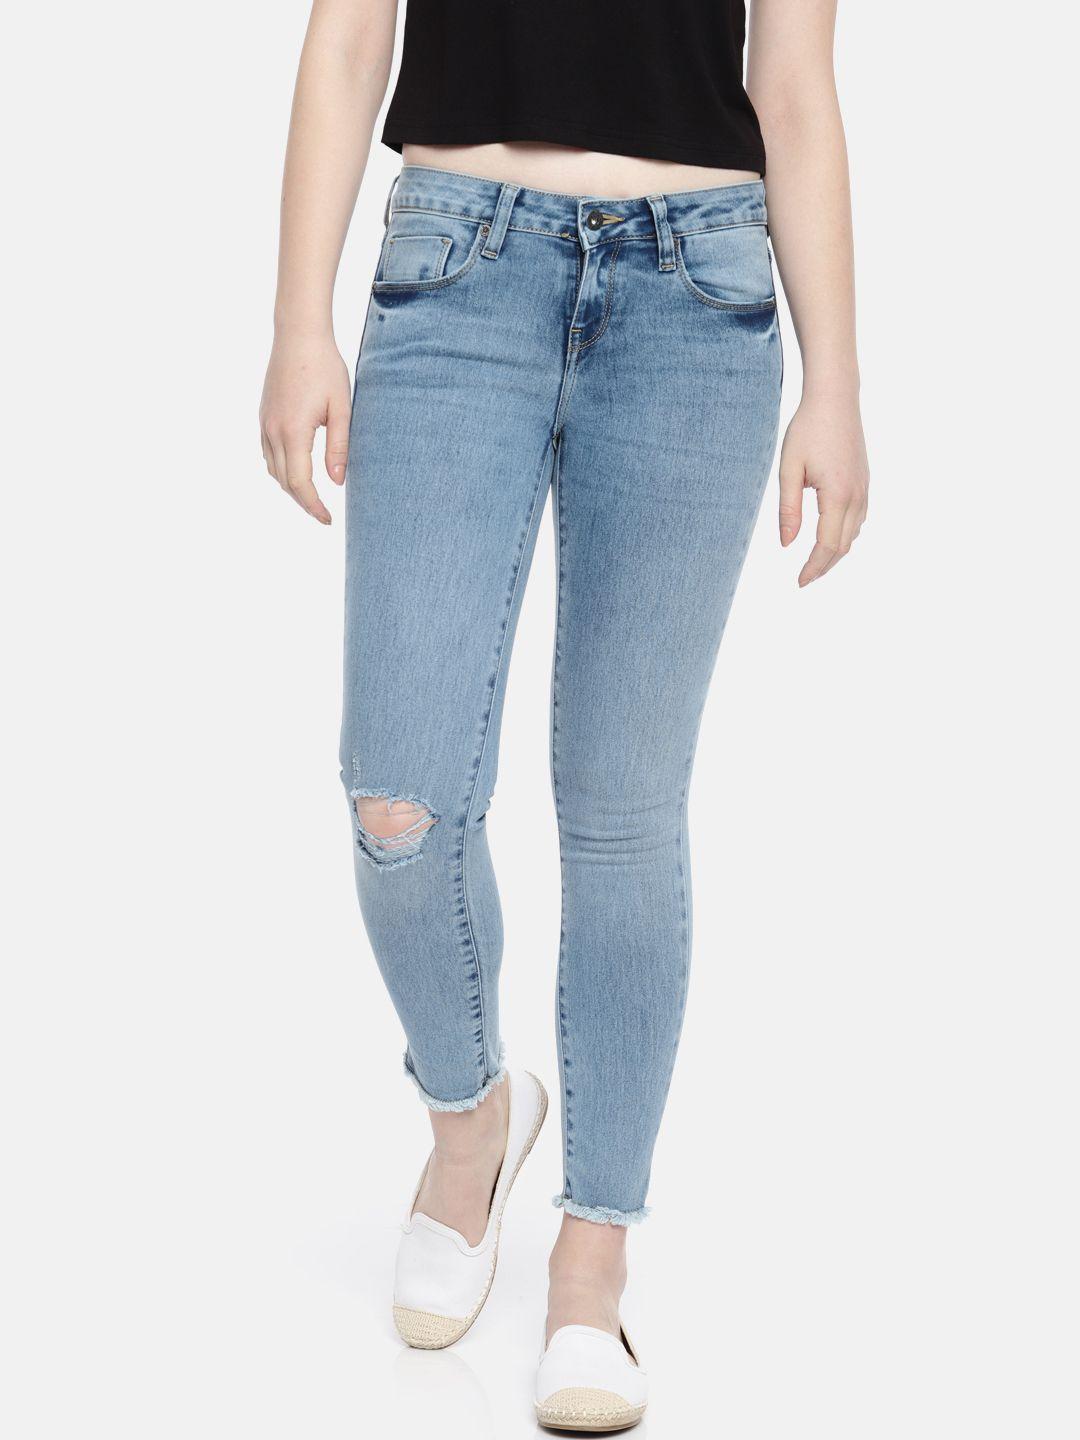 pepe-jeans-women-blue-jegging-super-skinny-mid-rise-low-distressed-stretchable-ankle-jeans